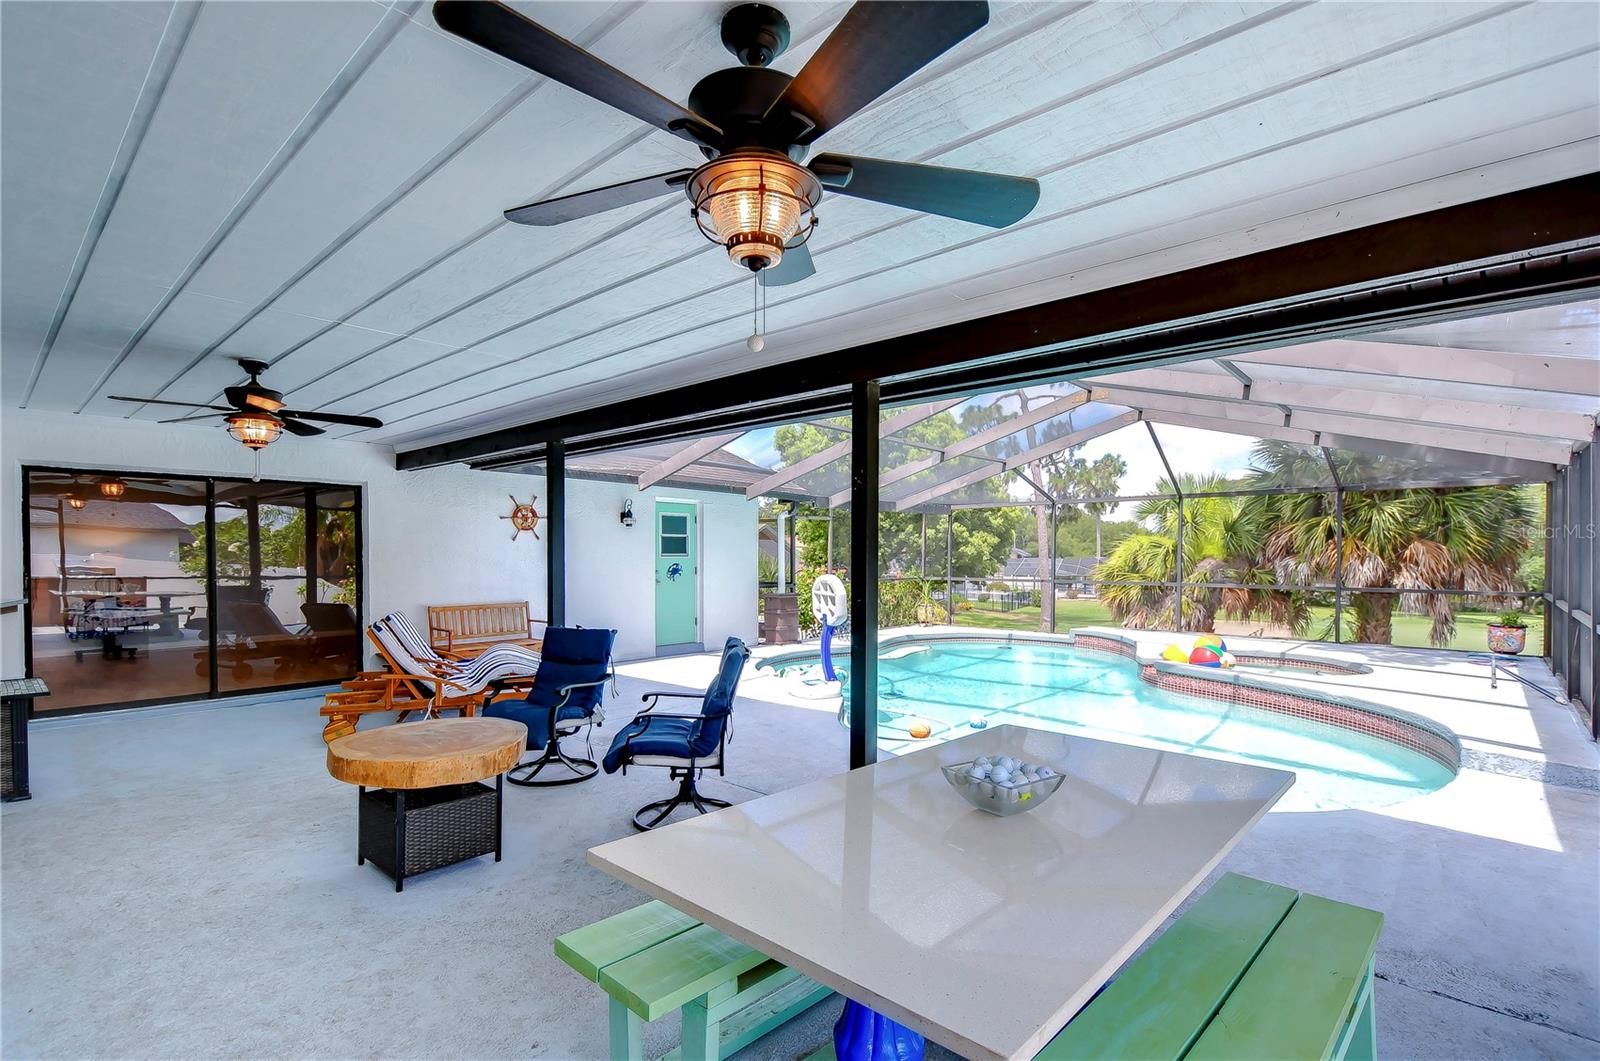 Large covered space on the lanai!